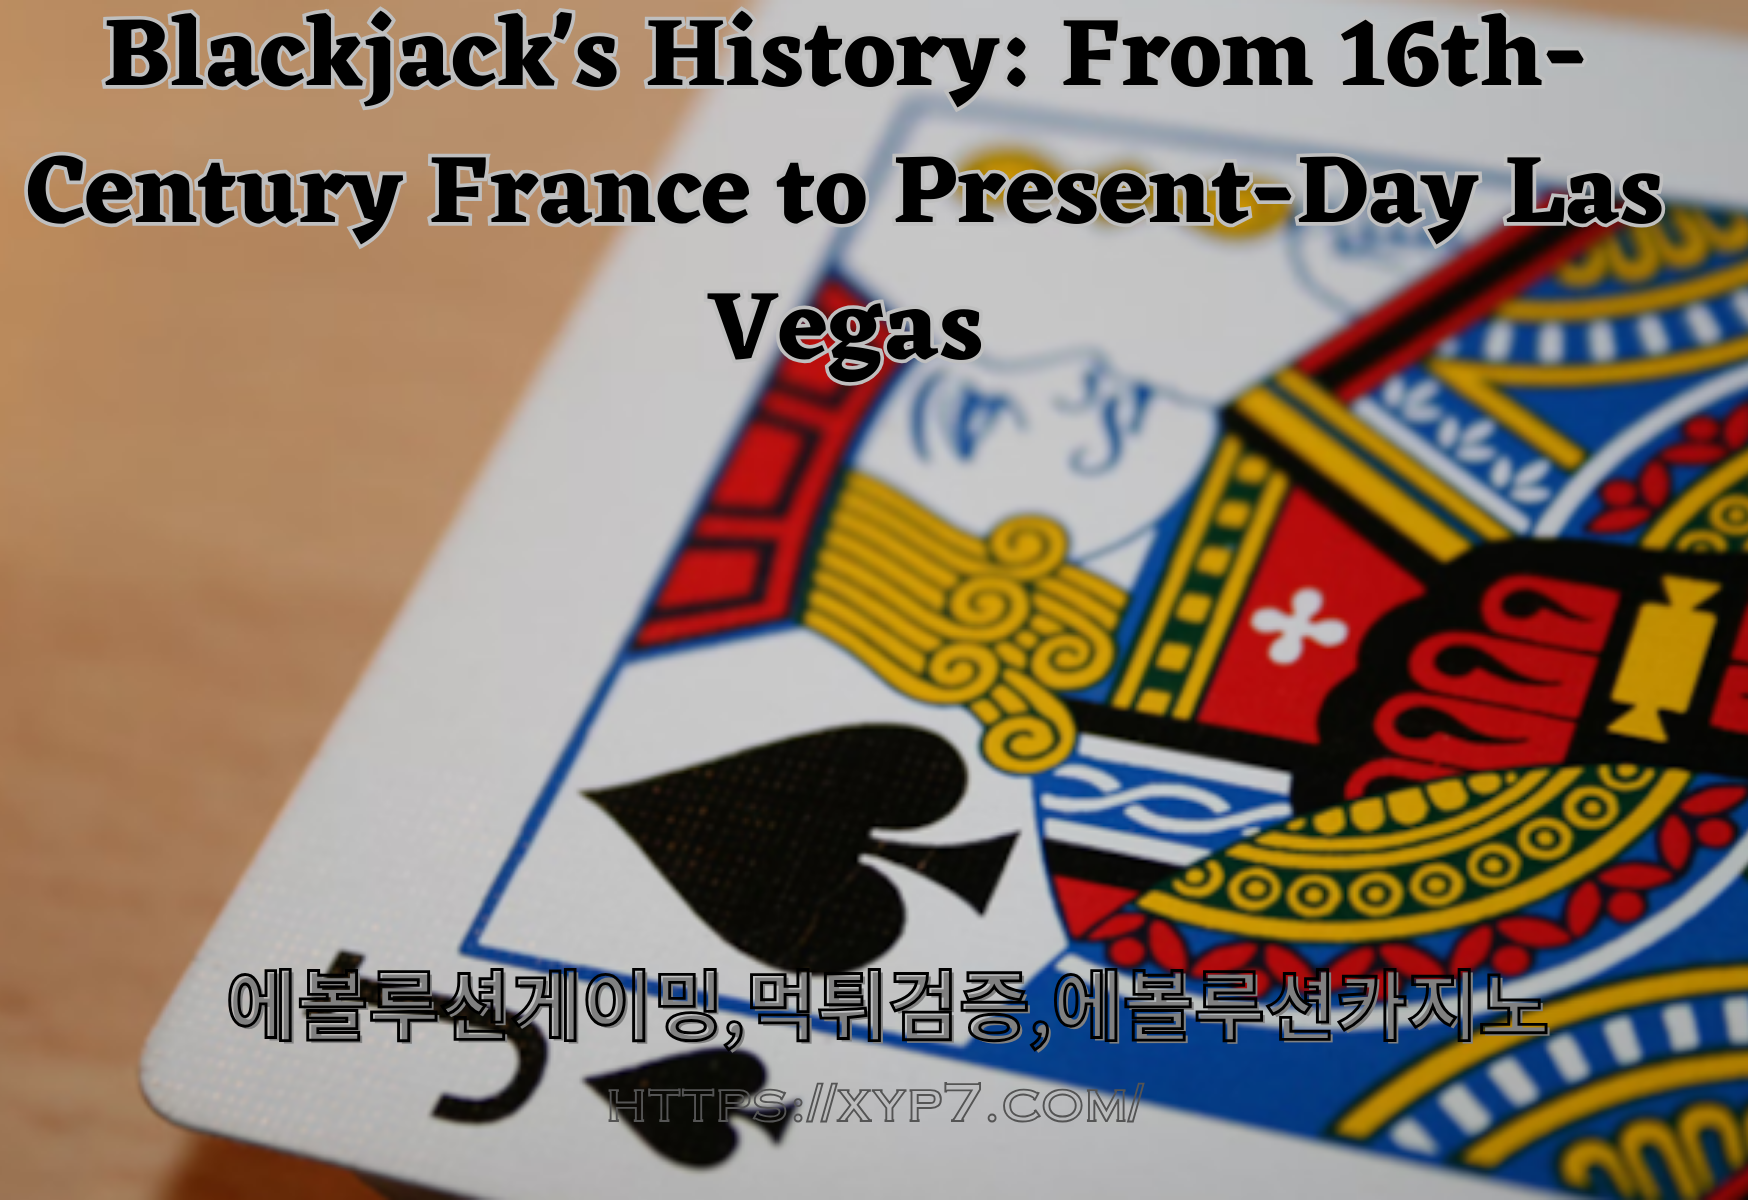 Blackjack's History: From 16th-Century France to Present-Day Las Vegas